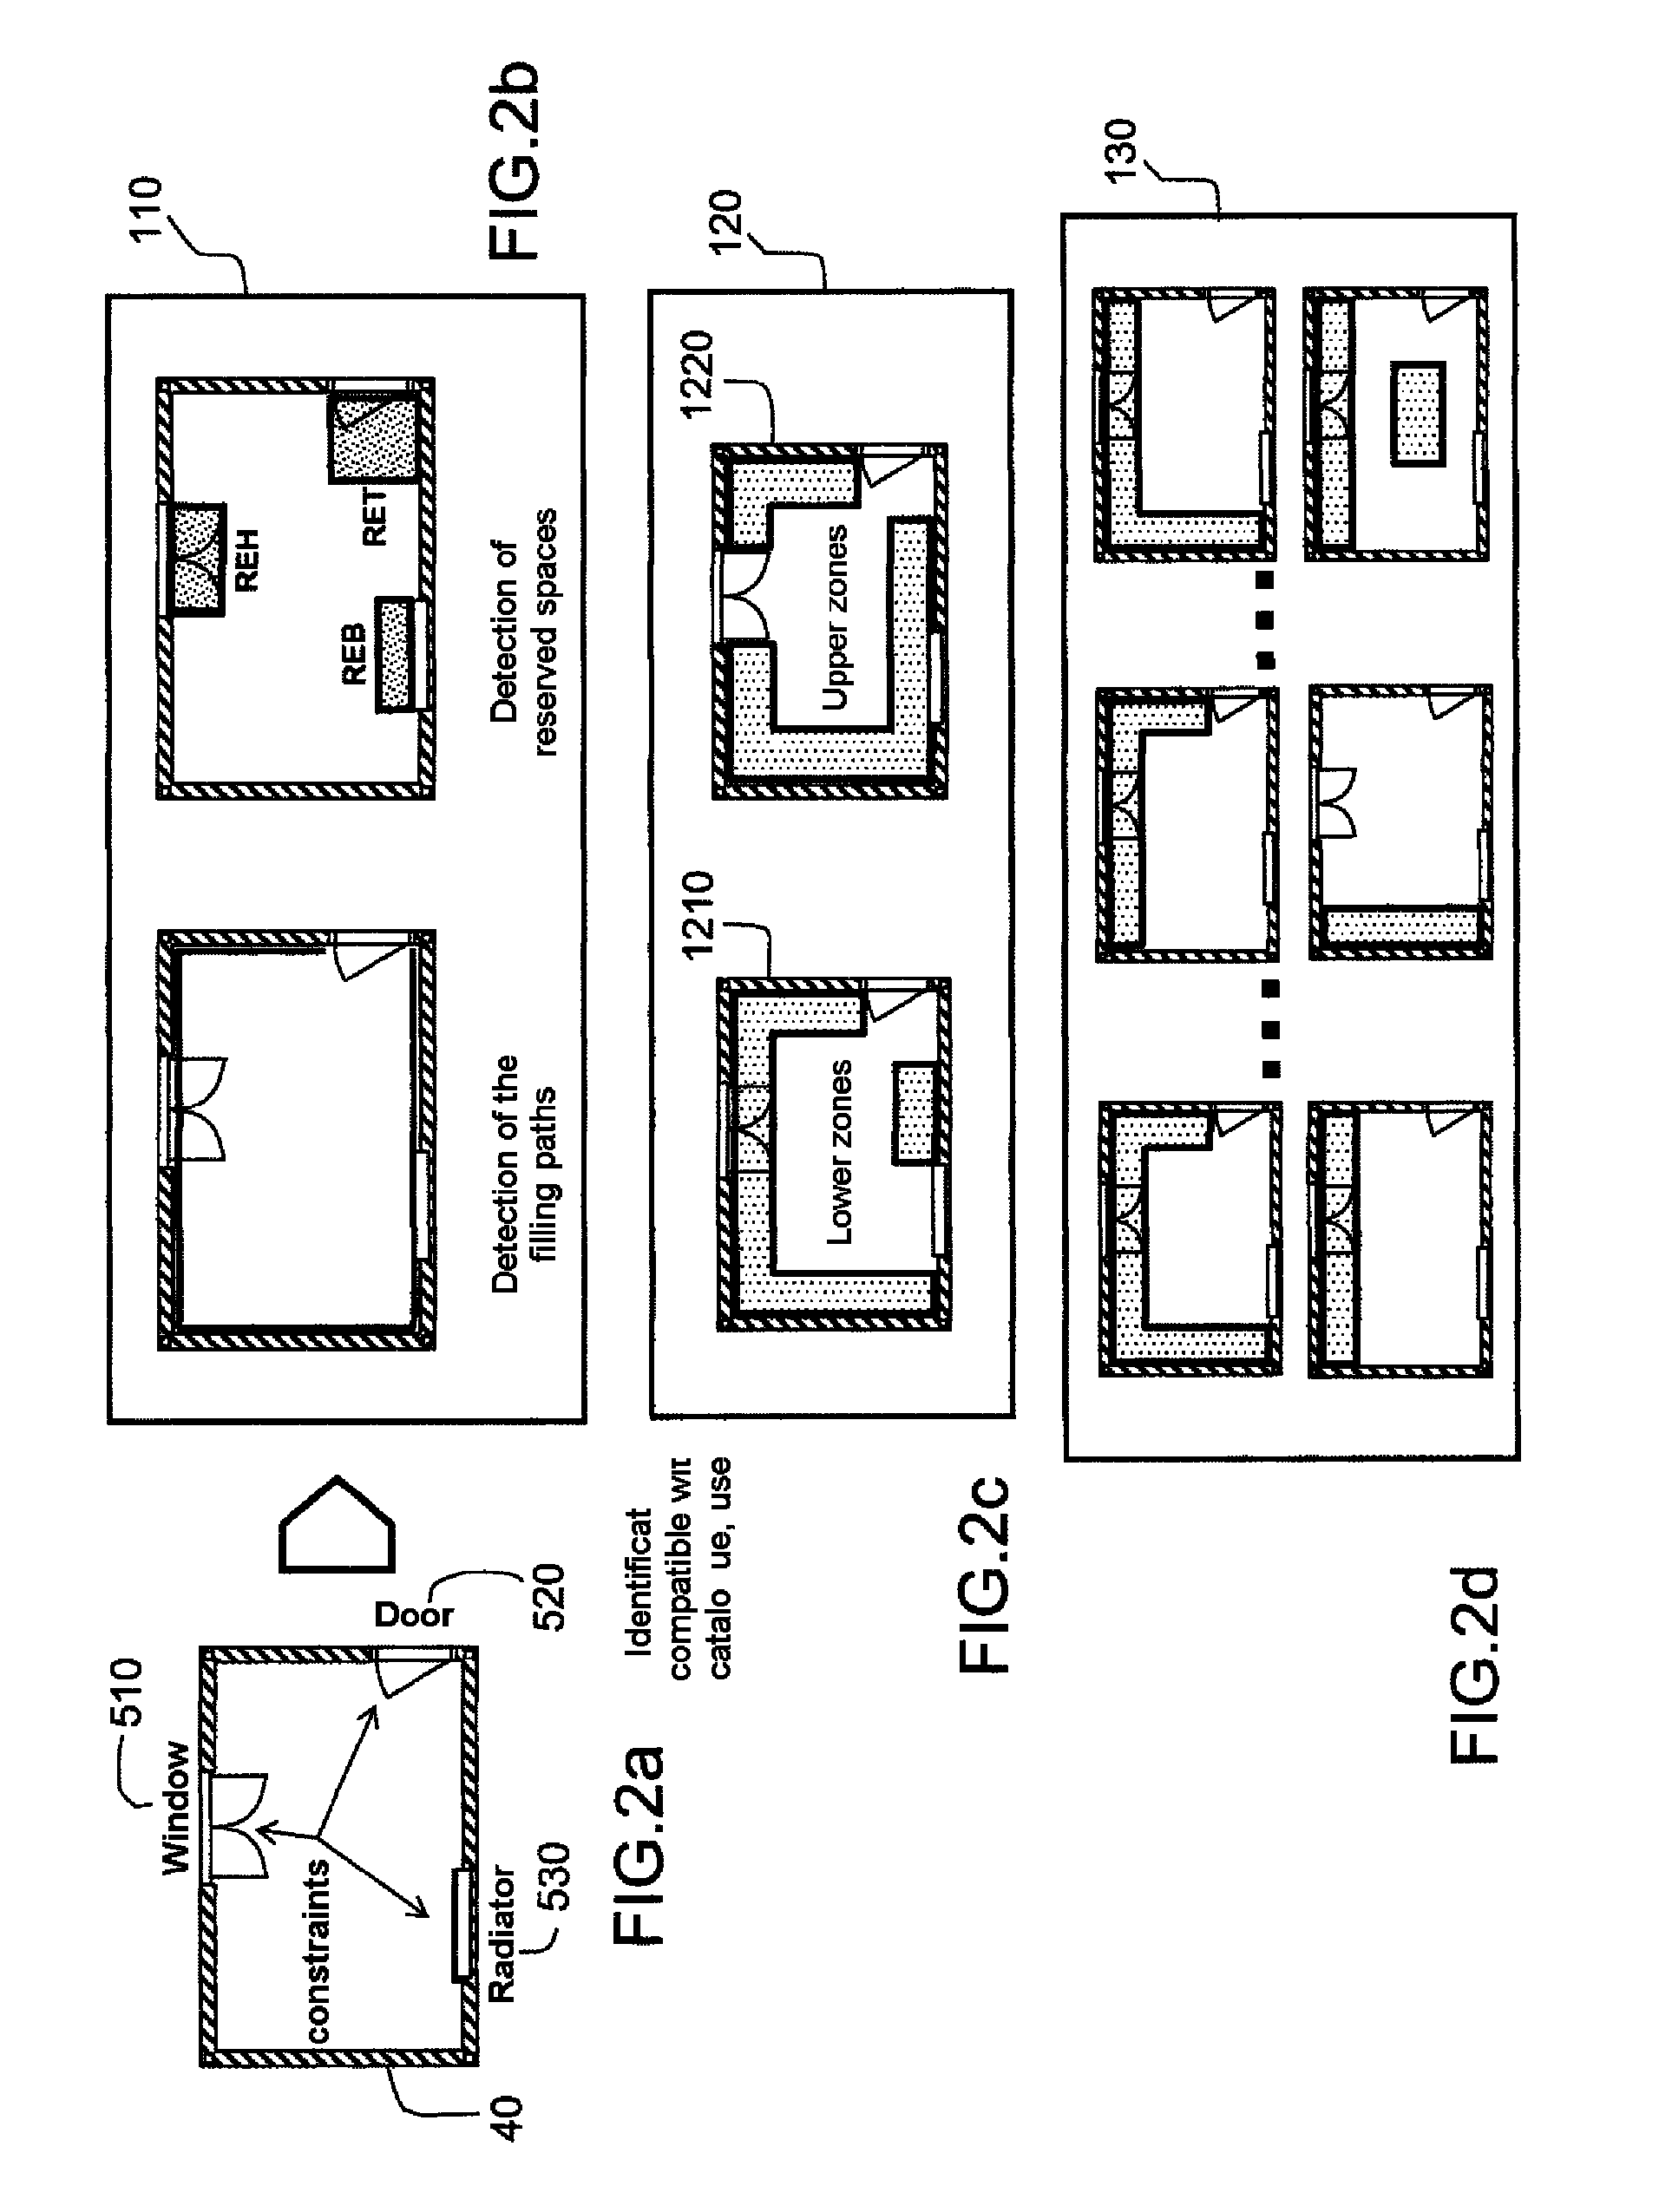 Computer aided design method and system for modular layouts